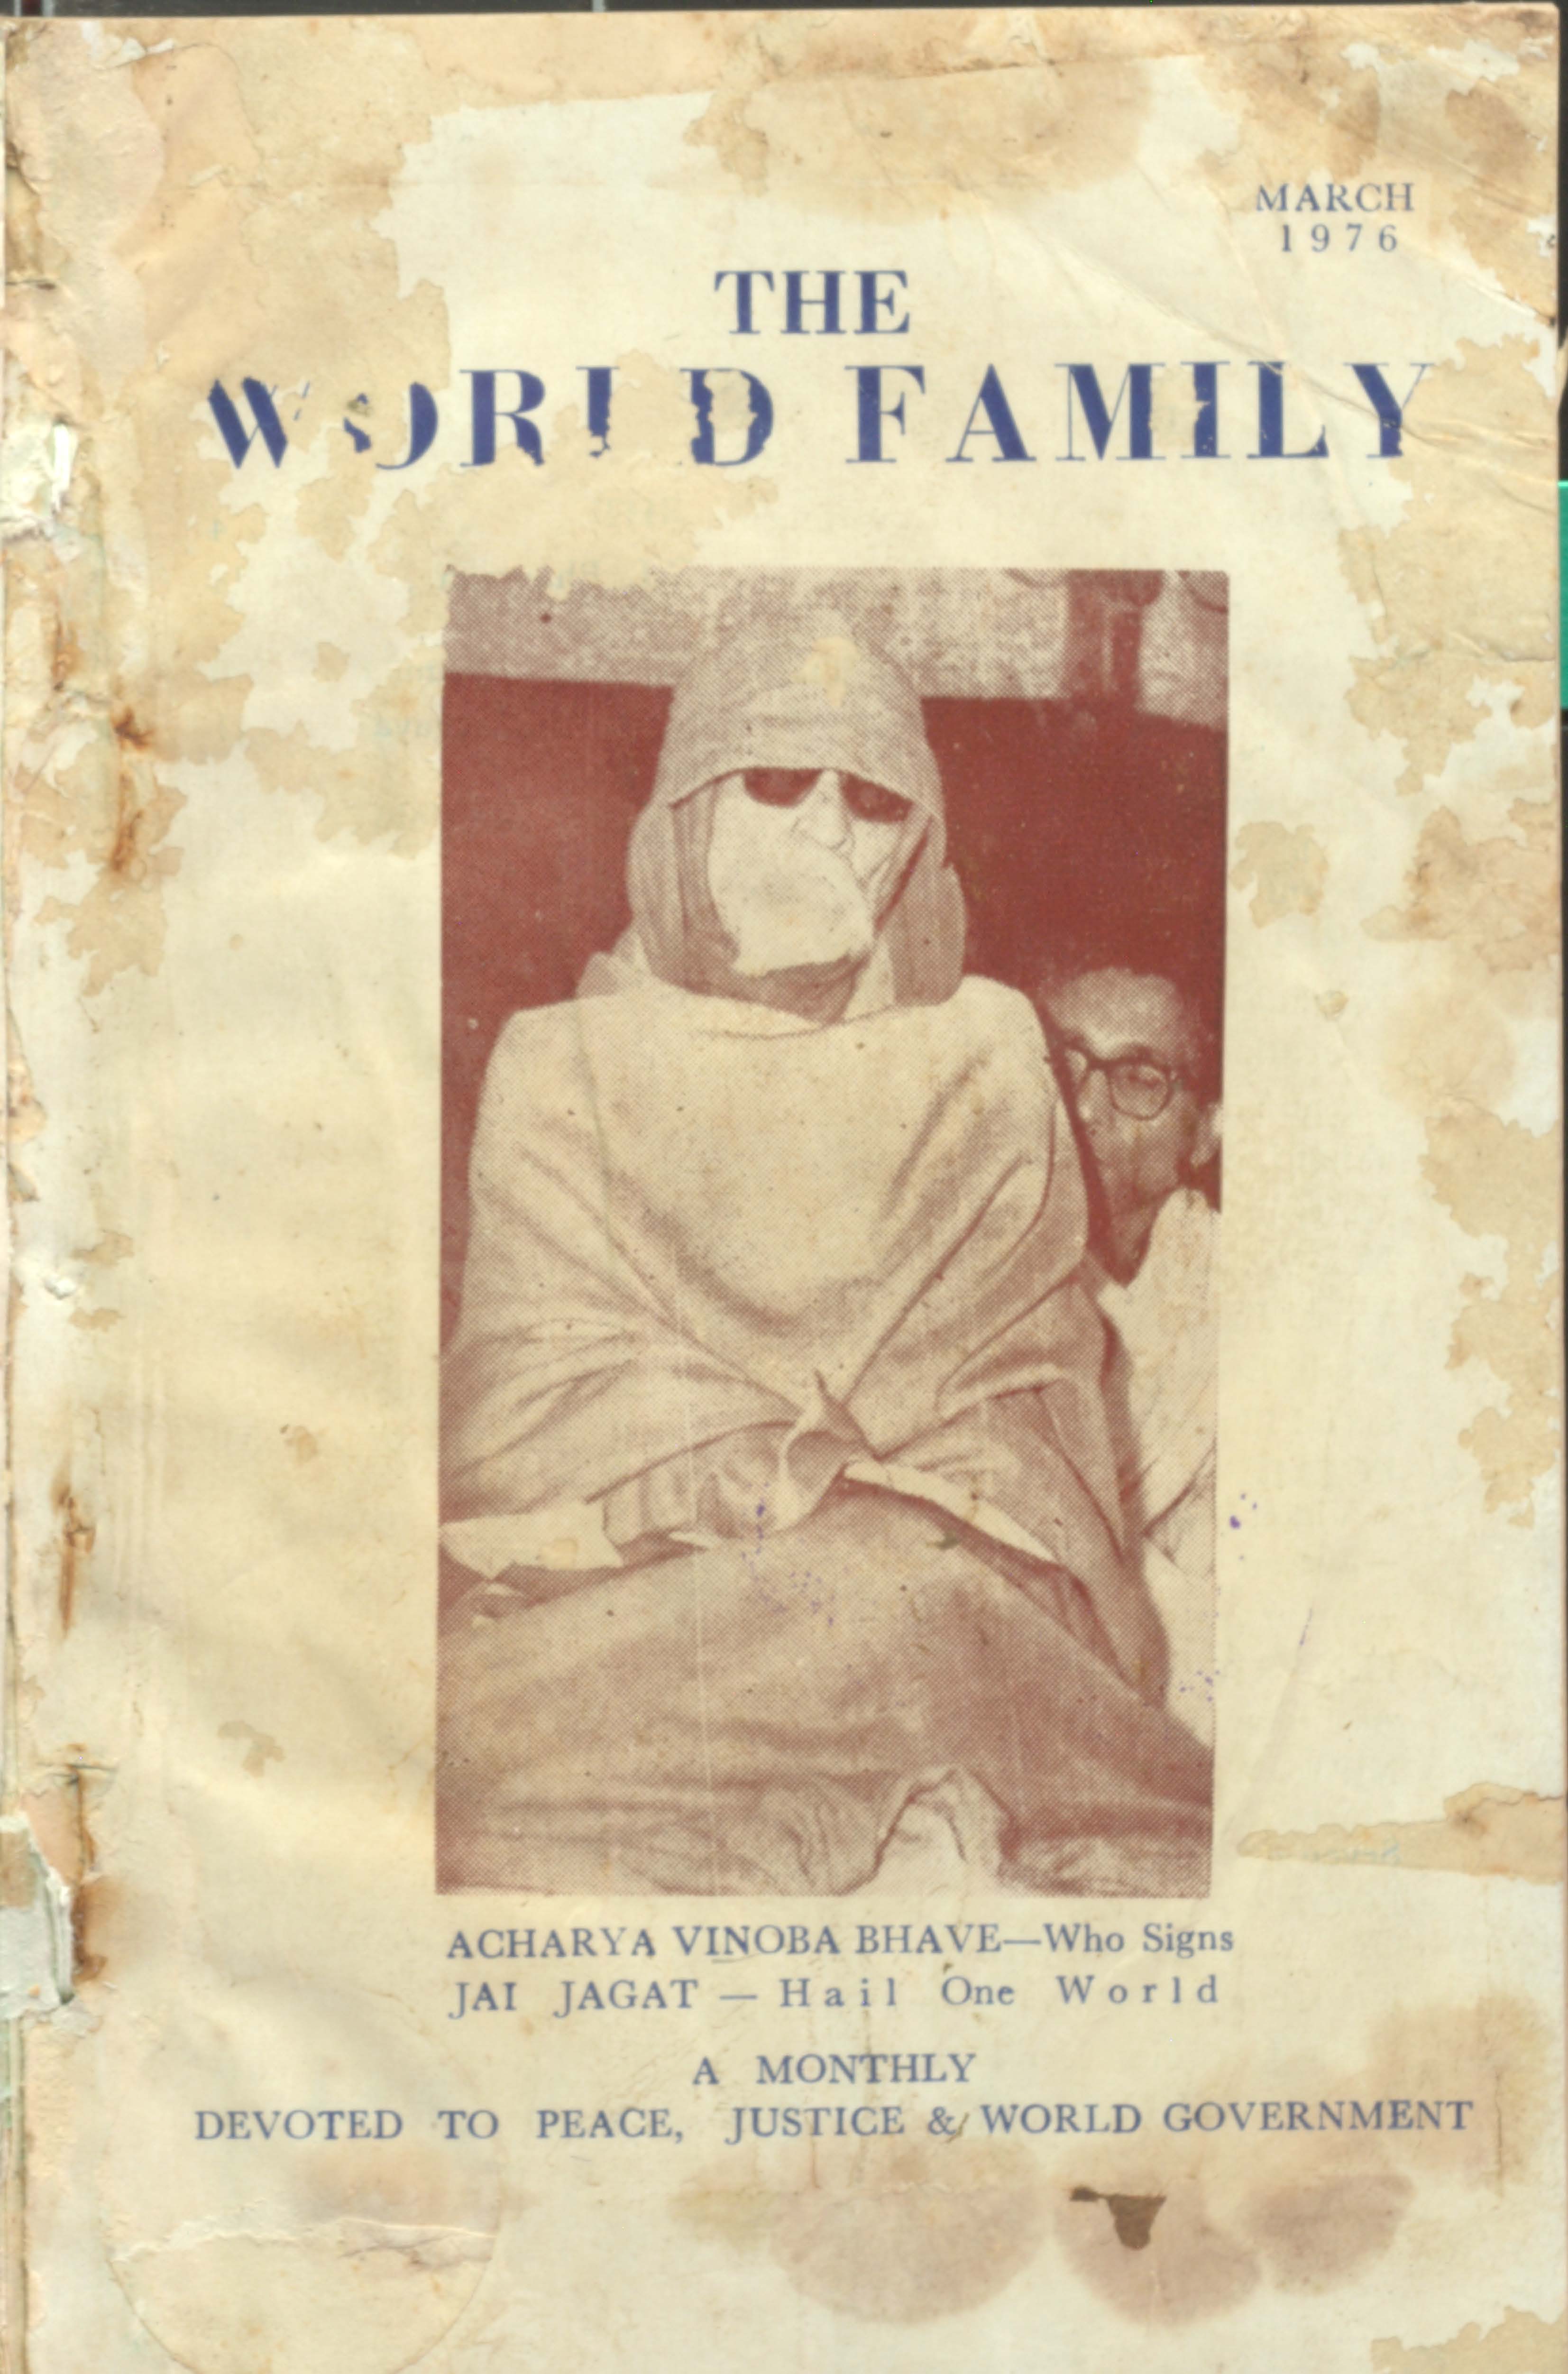 The World Family (March 1976)